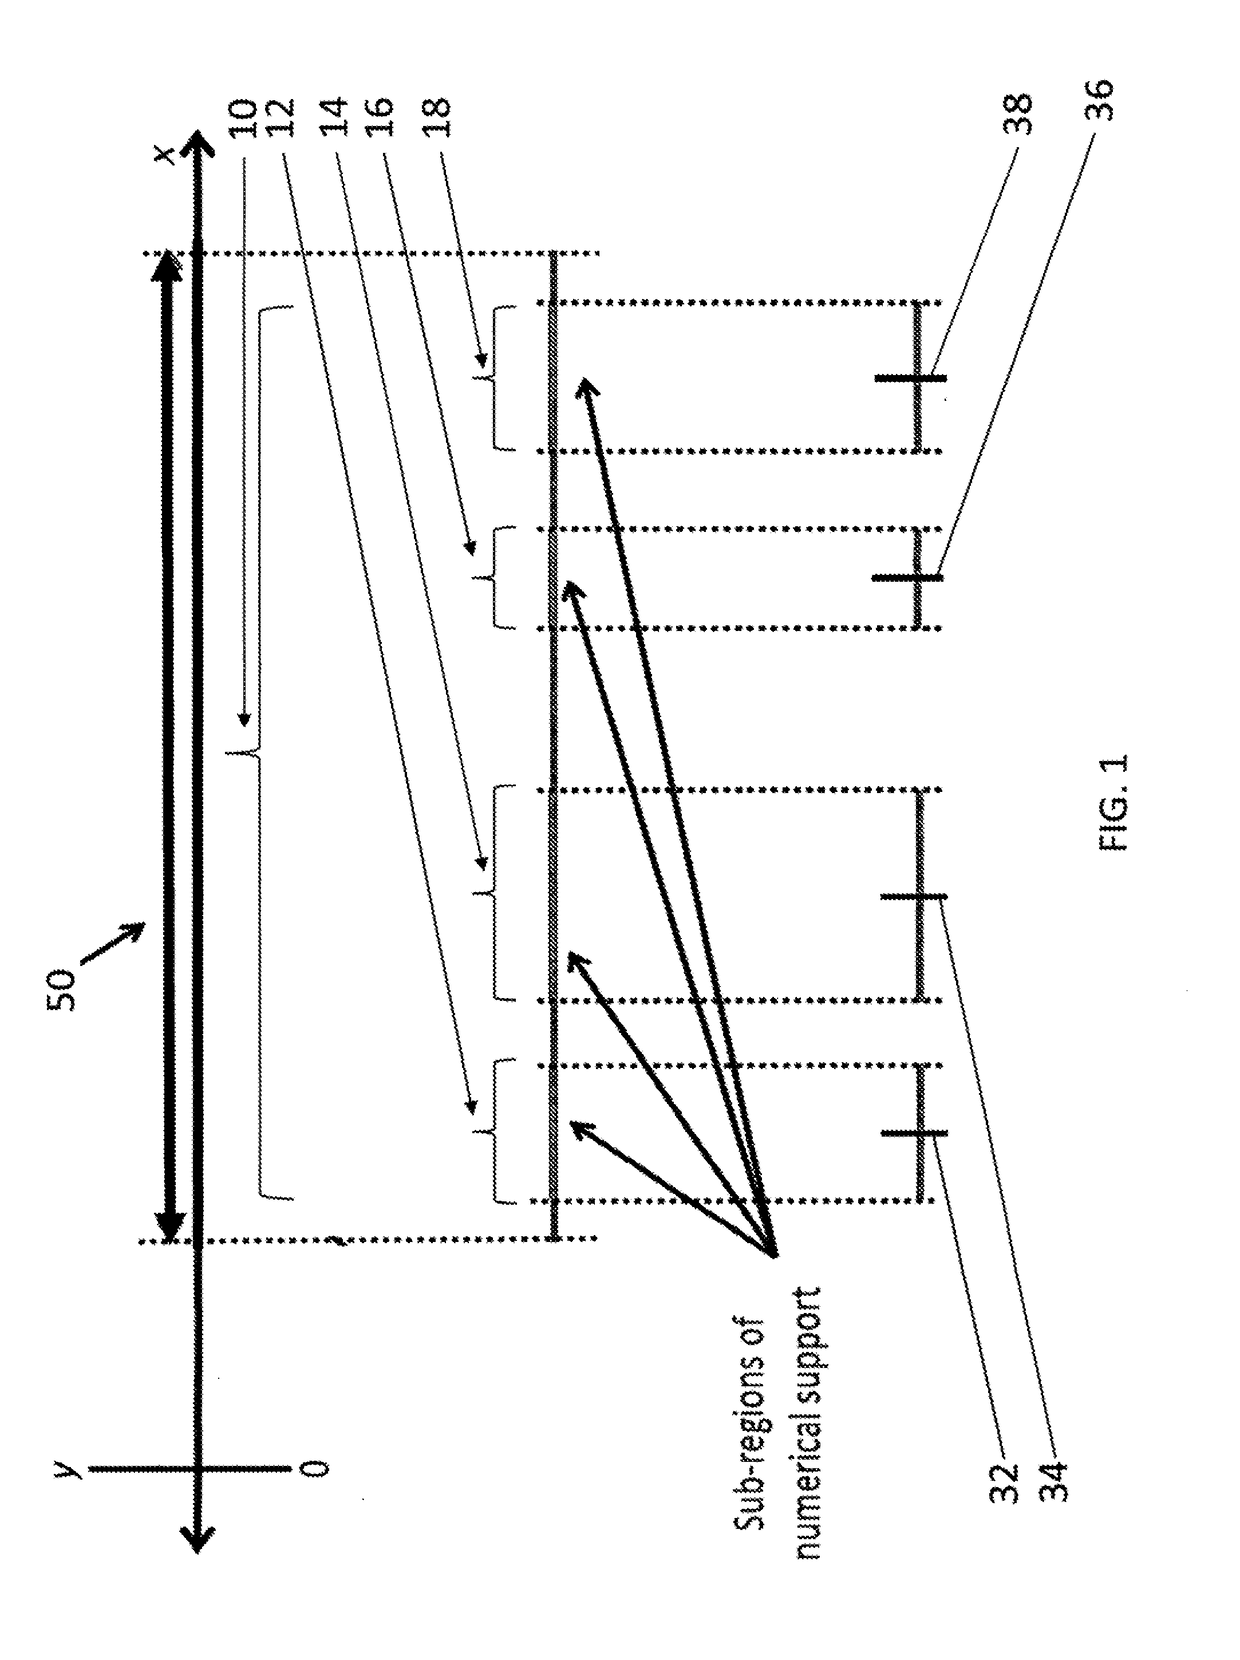 Design method for choosing spectral selectivity in multispectral and hyperspectral systems